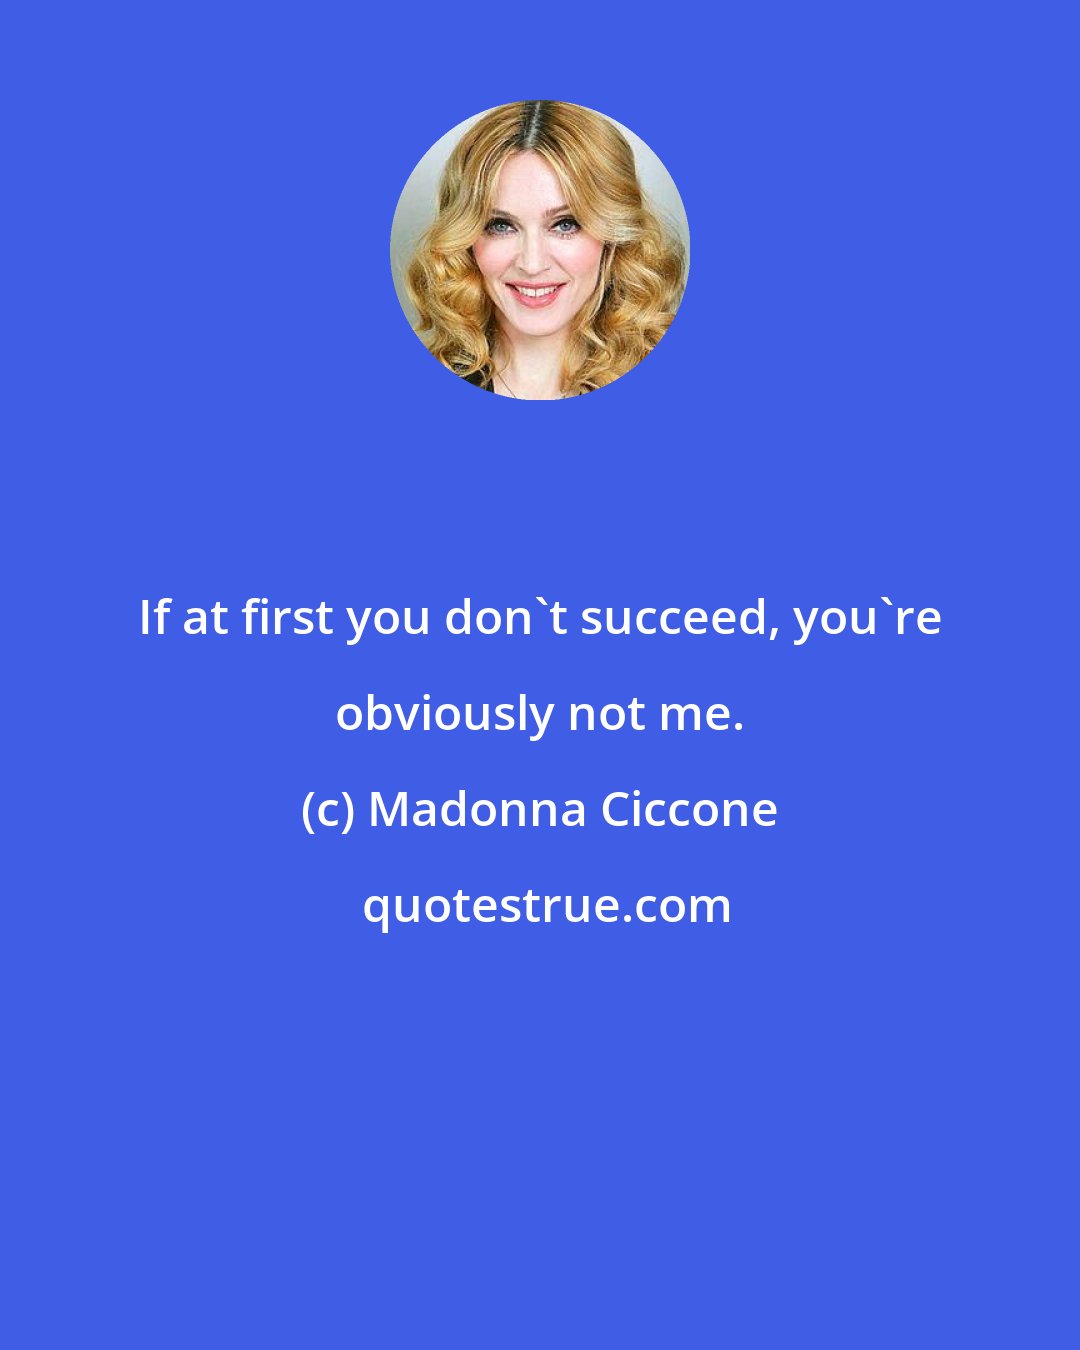 Madonna Ciccone: If at first you don't succeed, you're obviously not me.